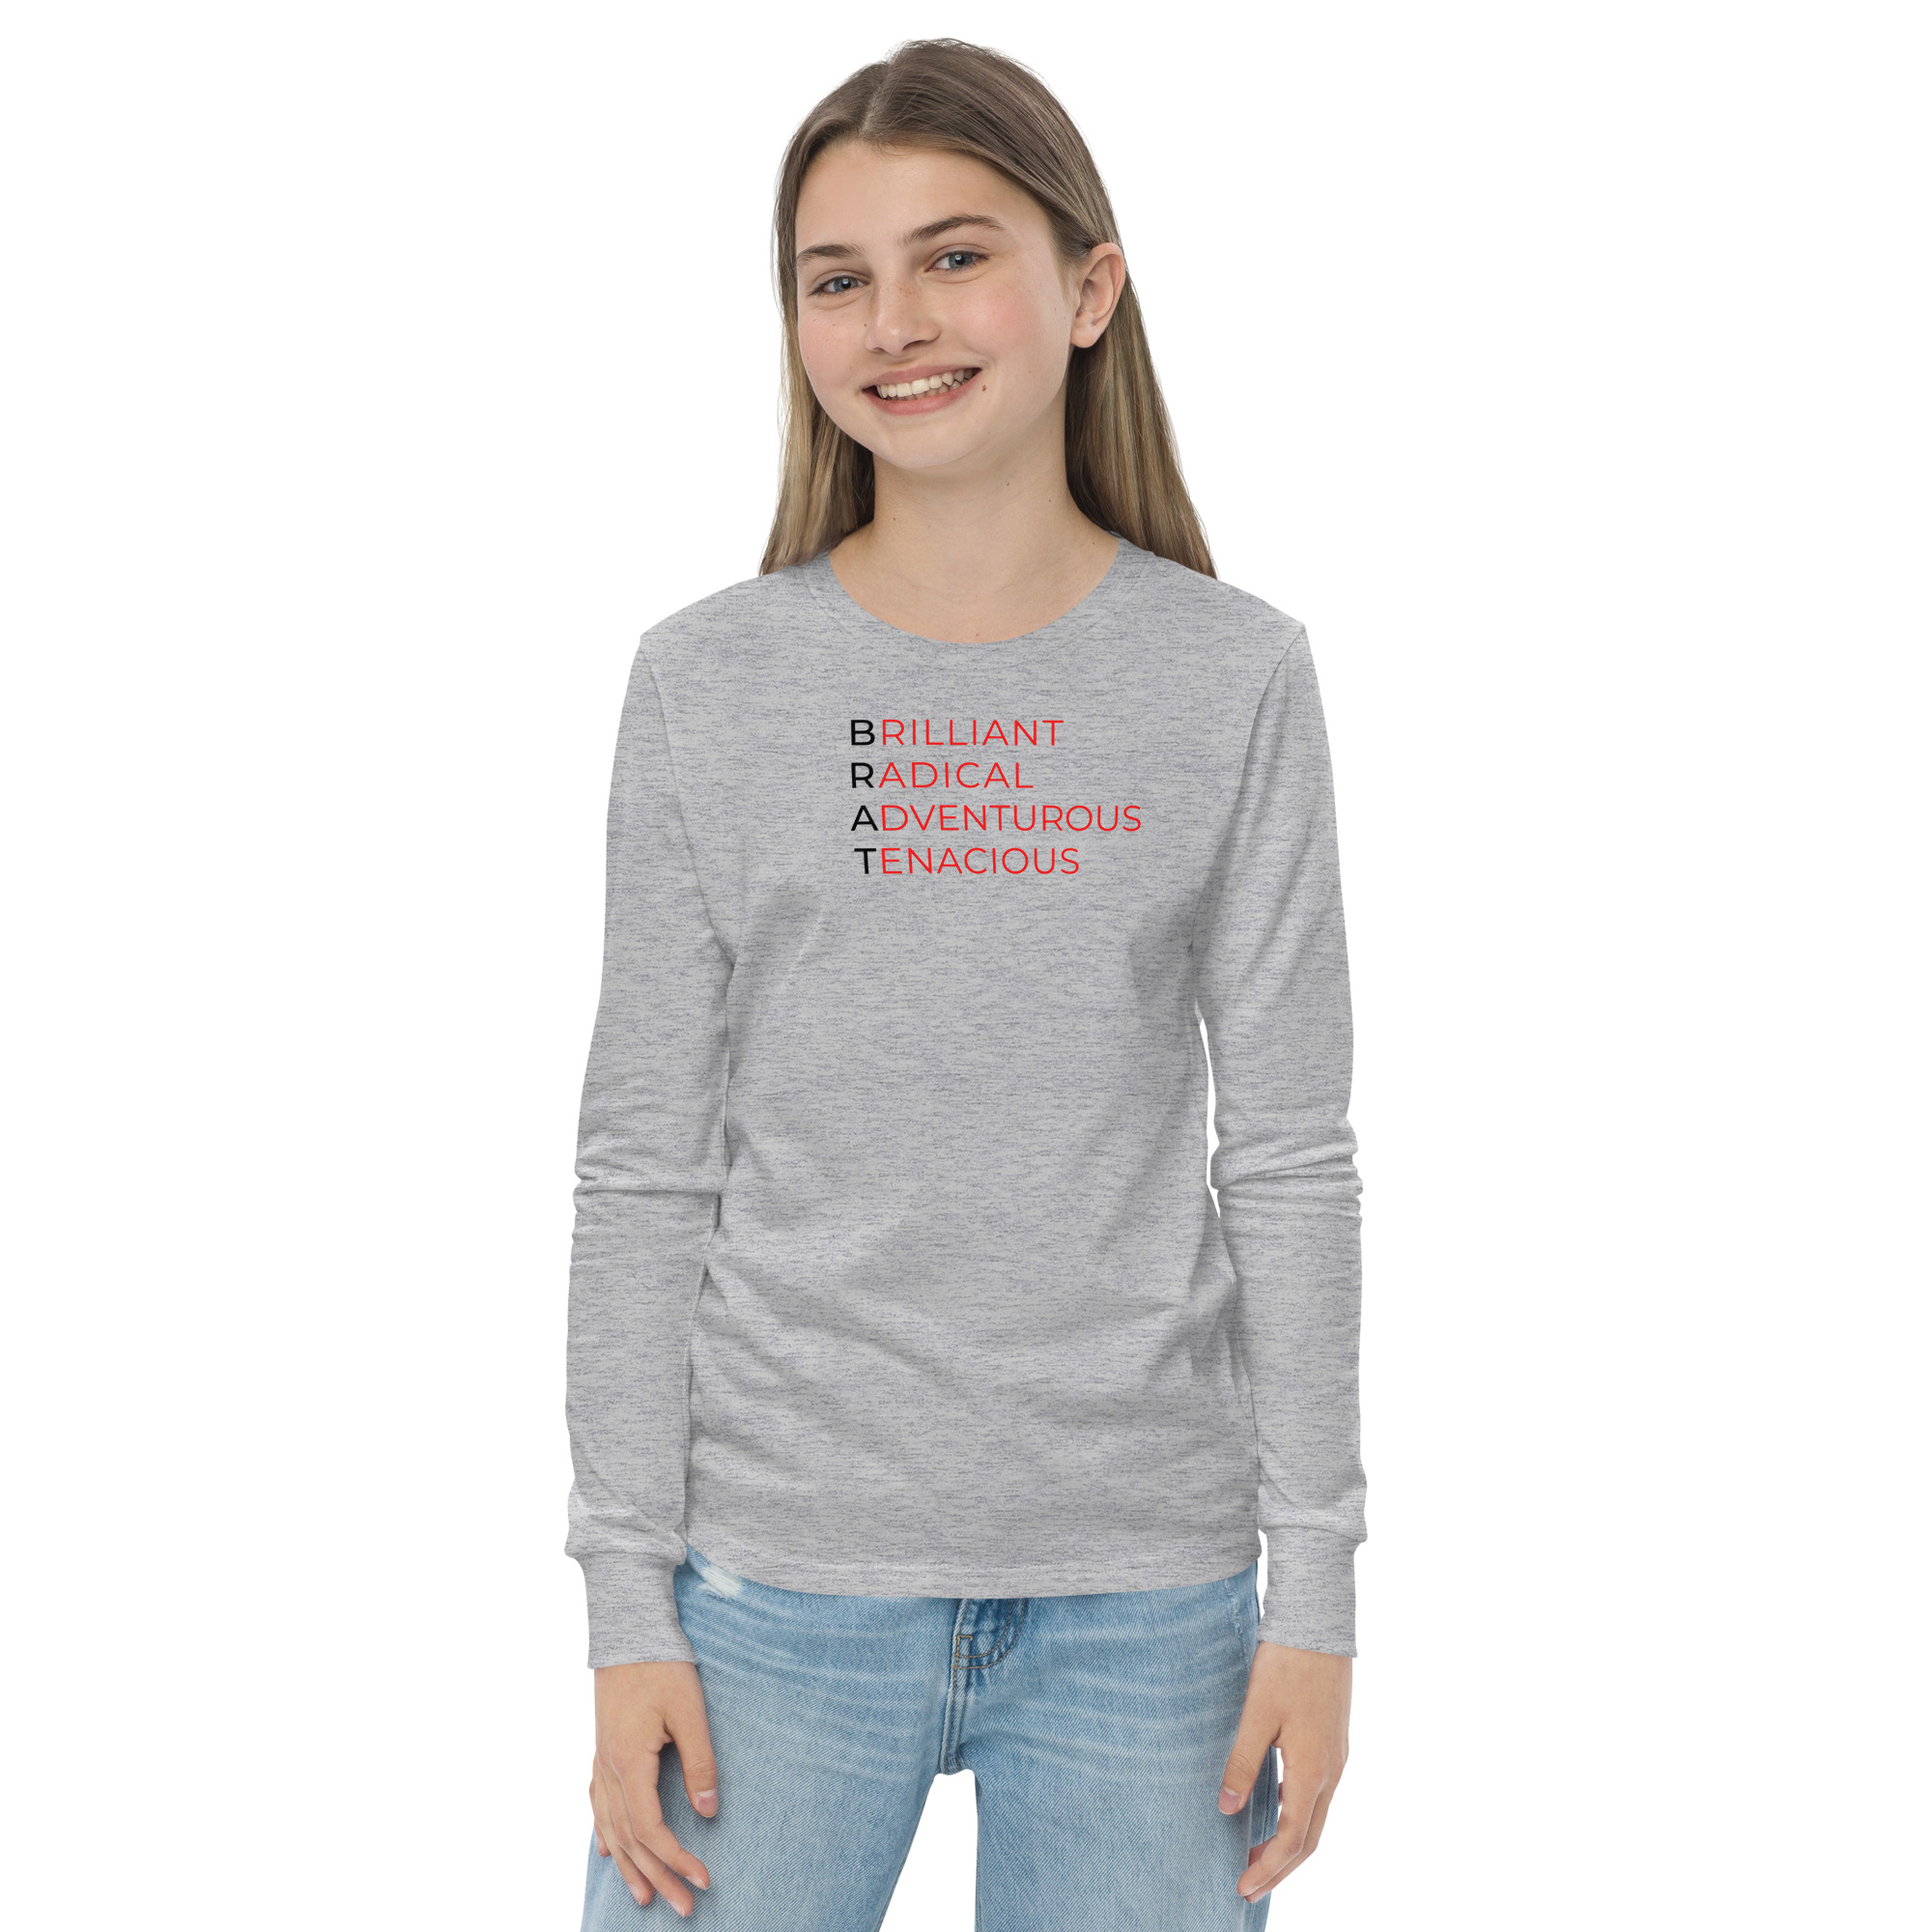 youth-long-sleeve-tee-athletic-heather-front-2-6384c461578c7.jpg